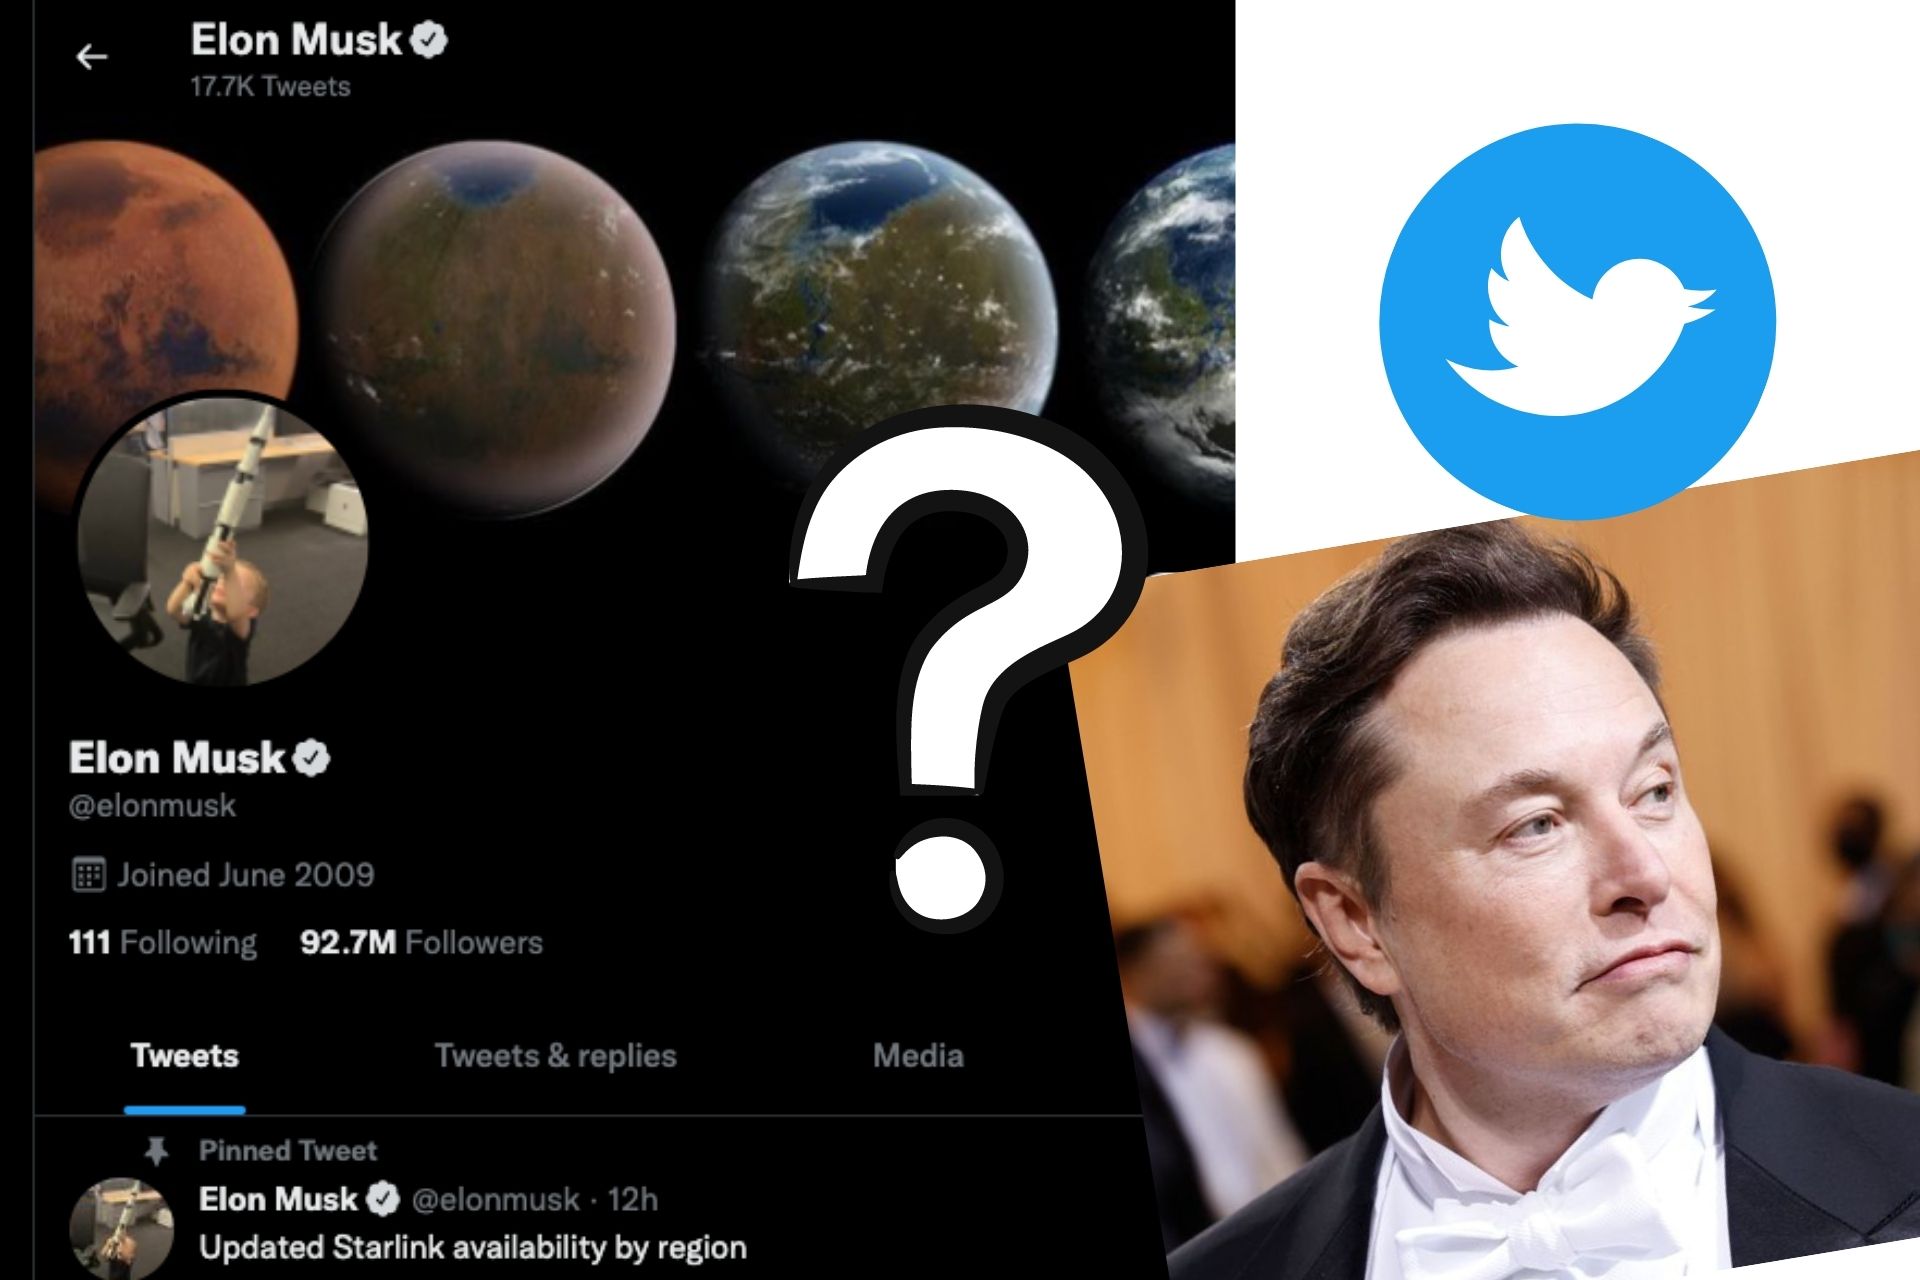 Tesla CEO Elon Musk Puts On Hold $44 Billion Twitter Deal Due To Bots